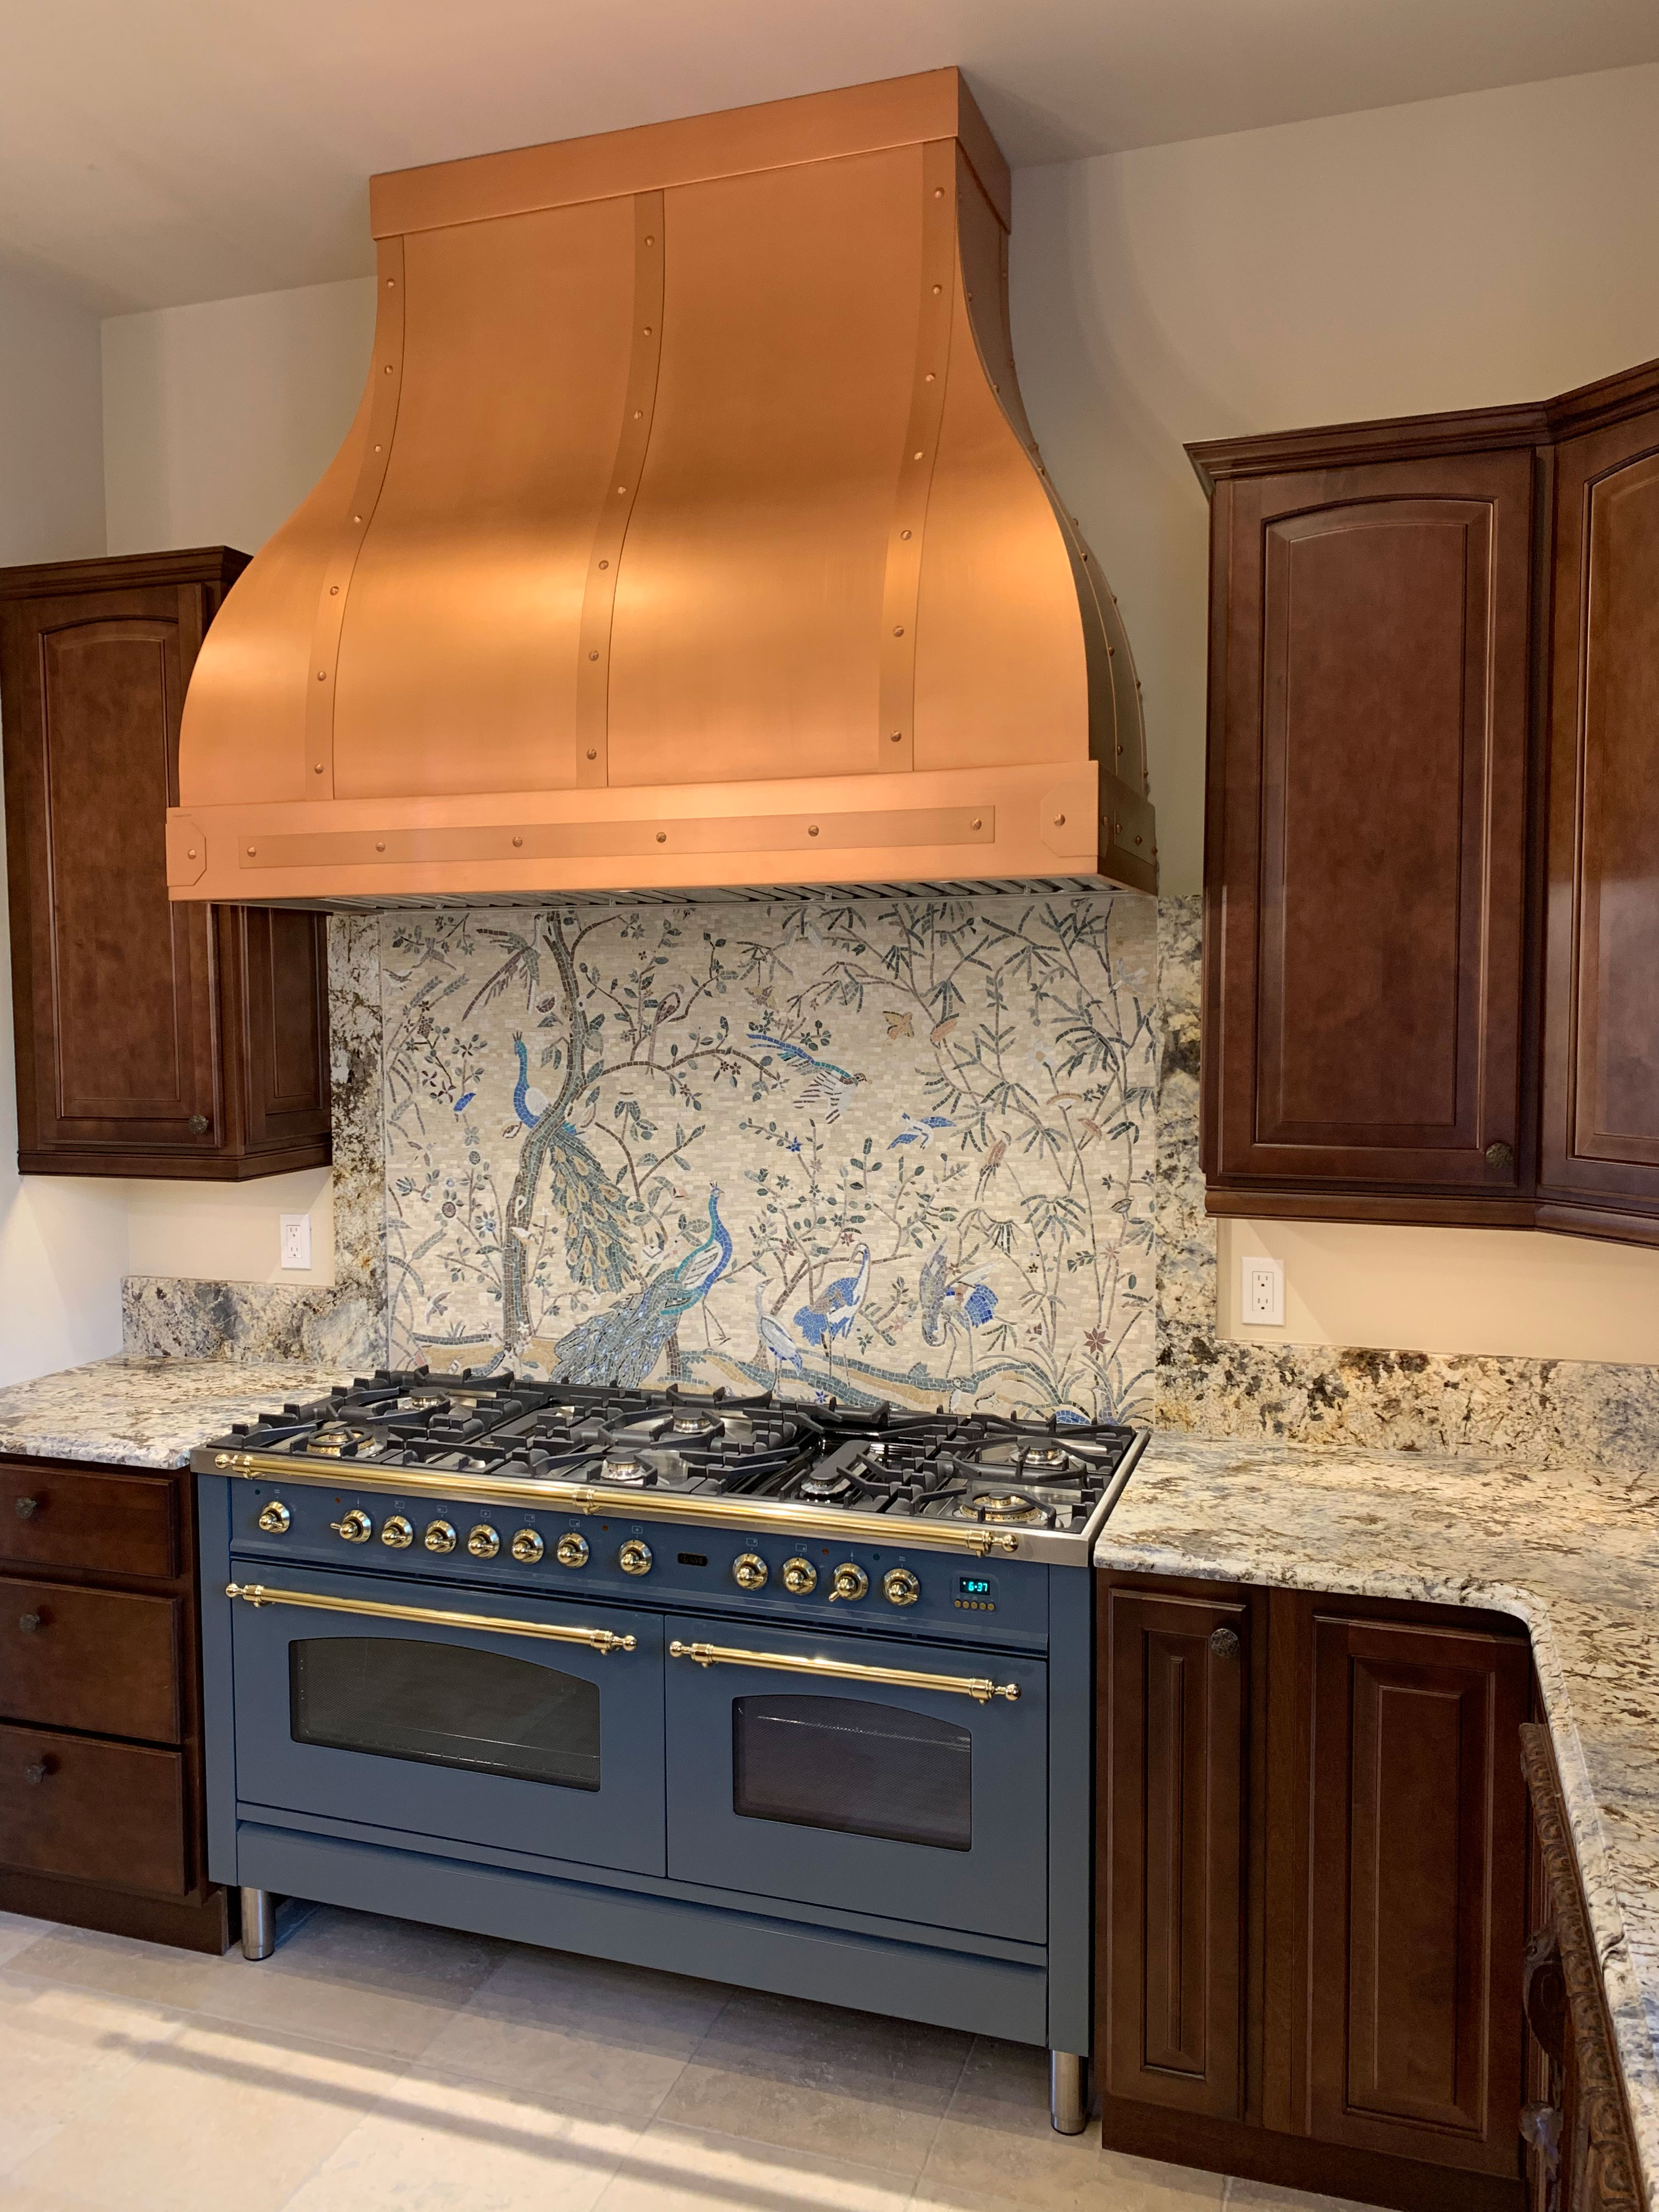 Large copper hood in kitchen with floral mural World CopperSmith